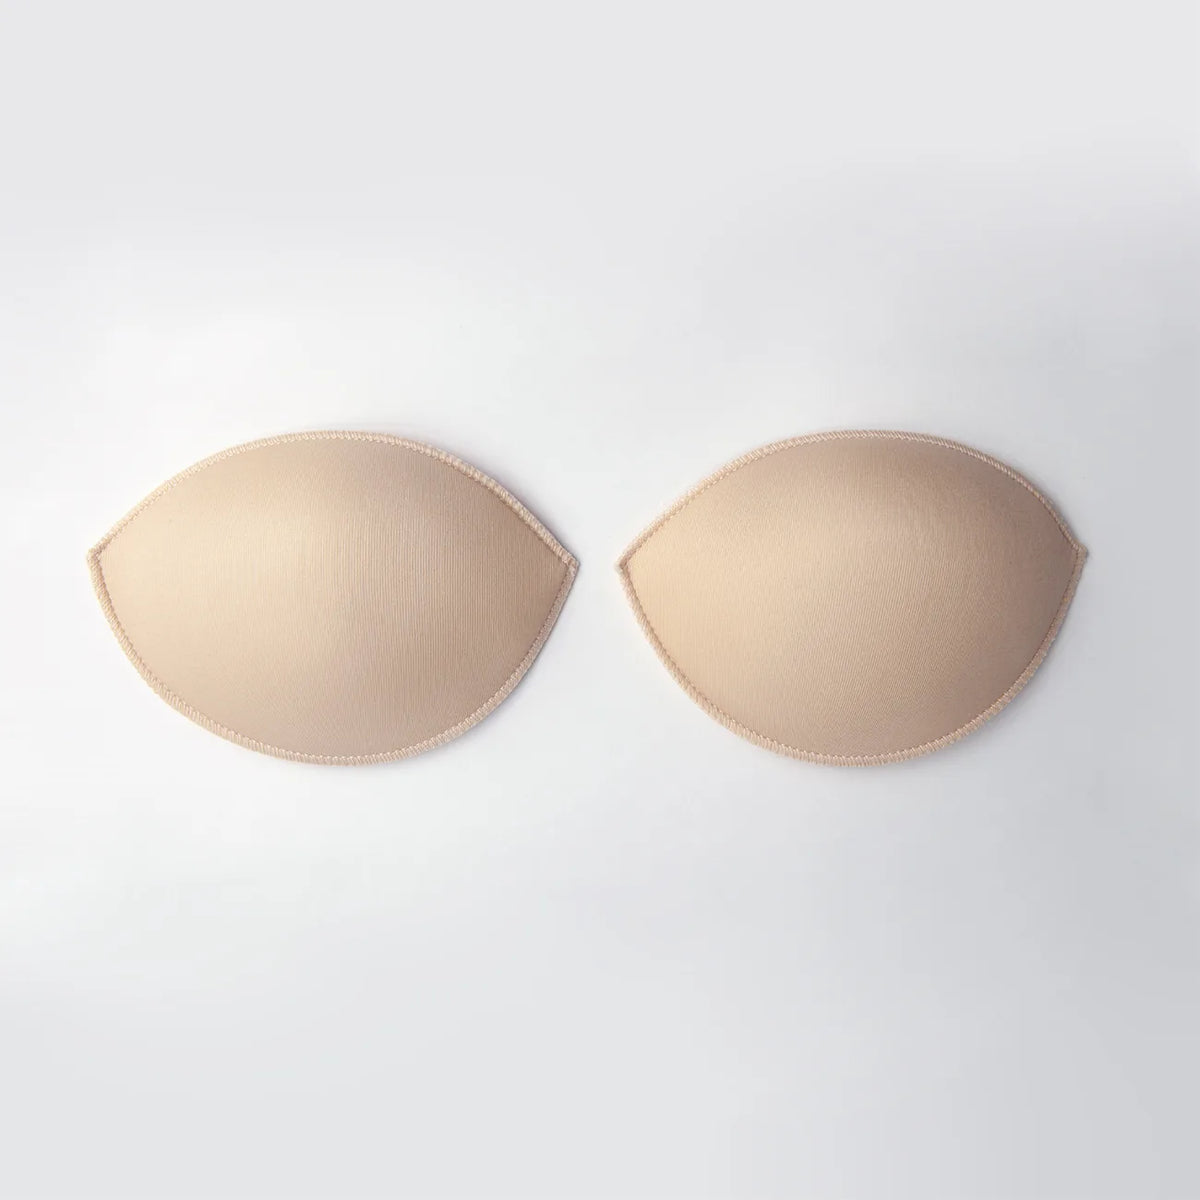 Water filled push up pads at Belle Lacet Lingerie.